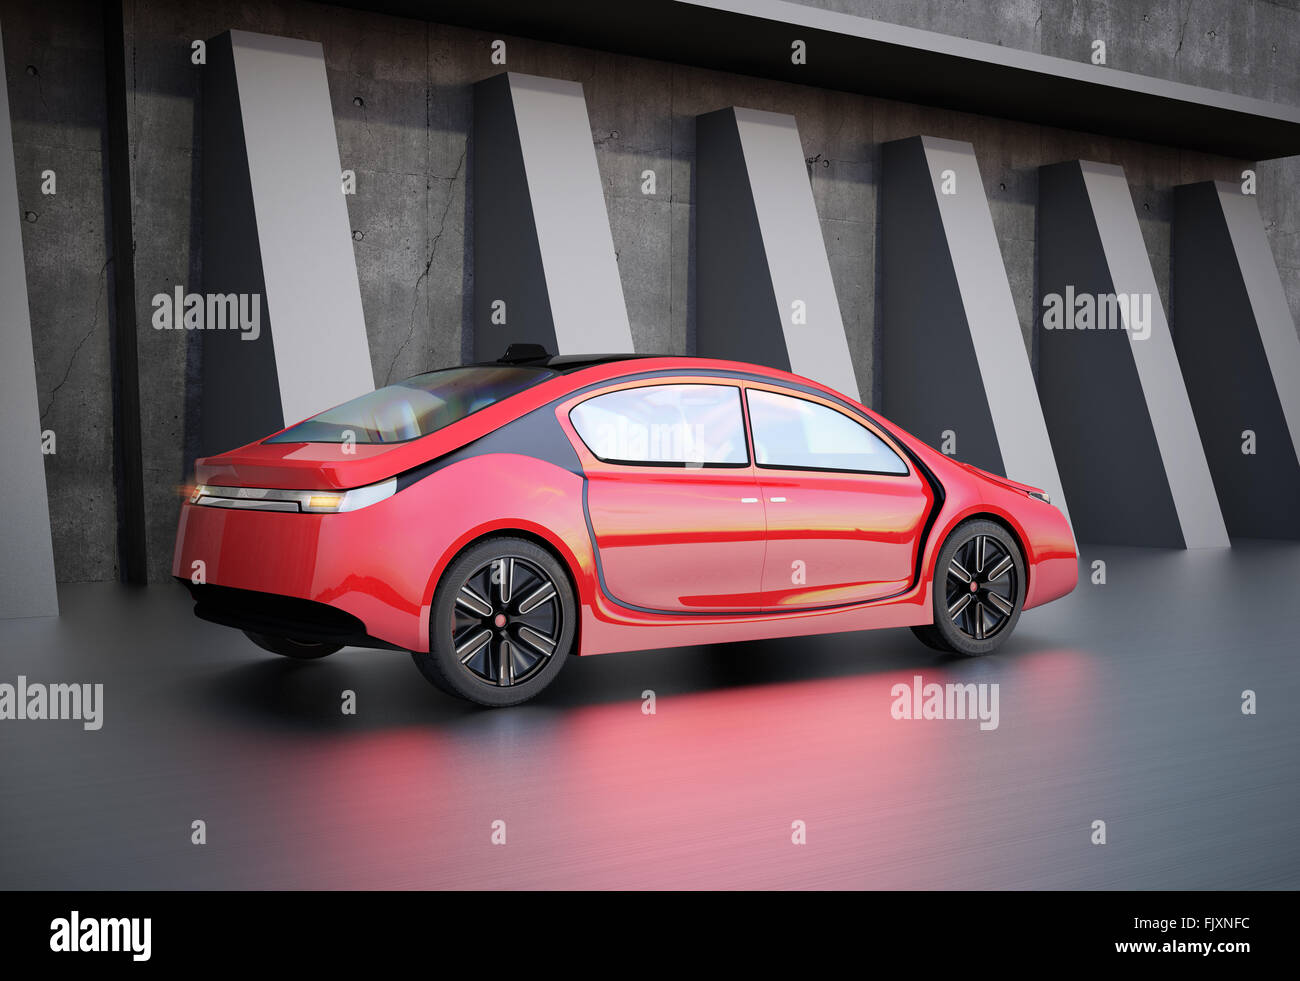 Rear view of red electric car. 3D rendering image. Stock Photo